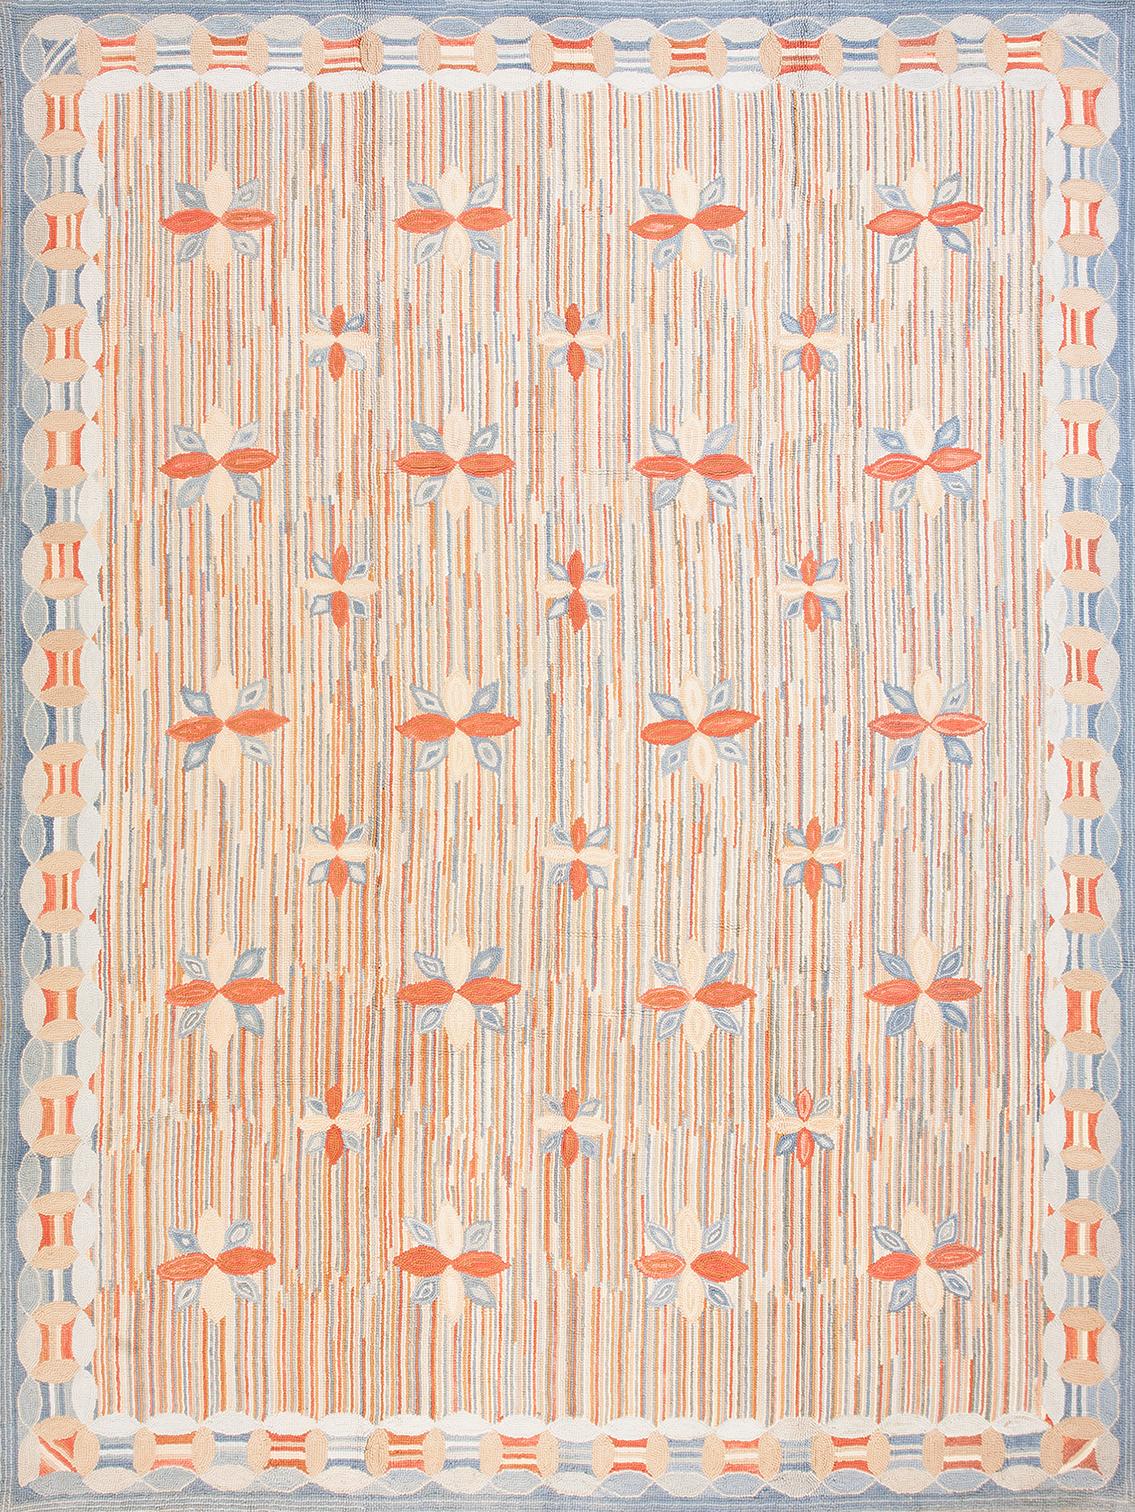 Contemporary Handmade Cotton Hooked Rug ( 10' x 14' - 305 x 427cm ) For Sale